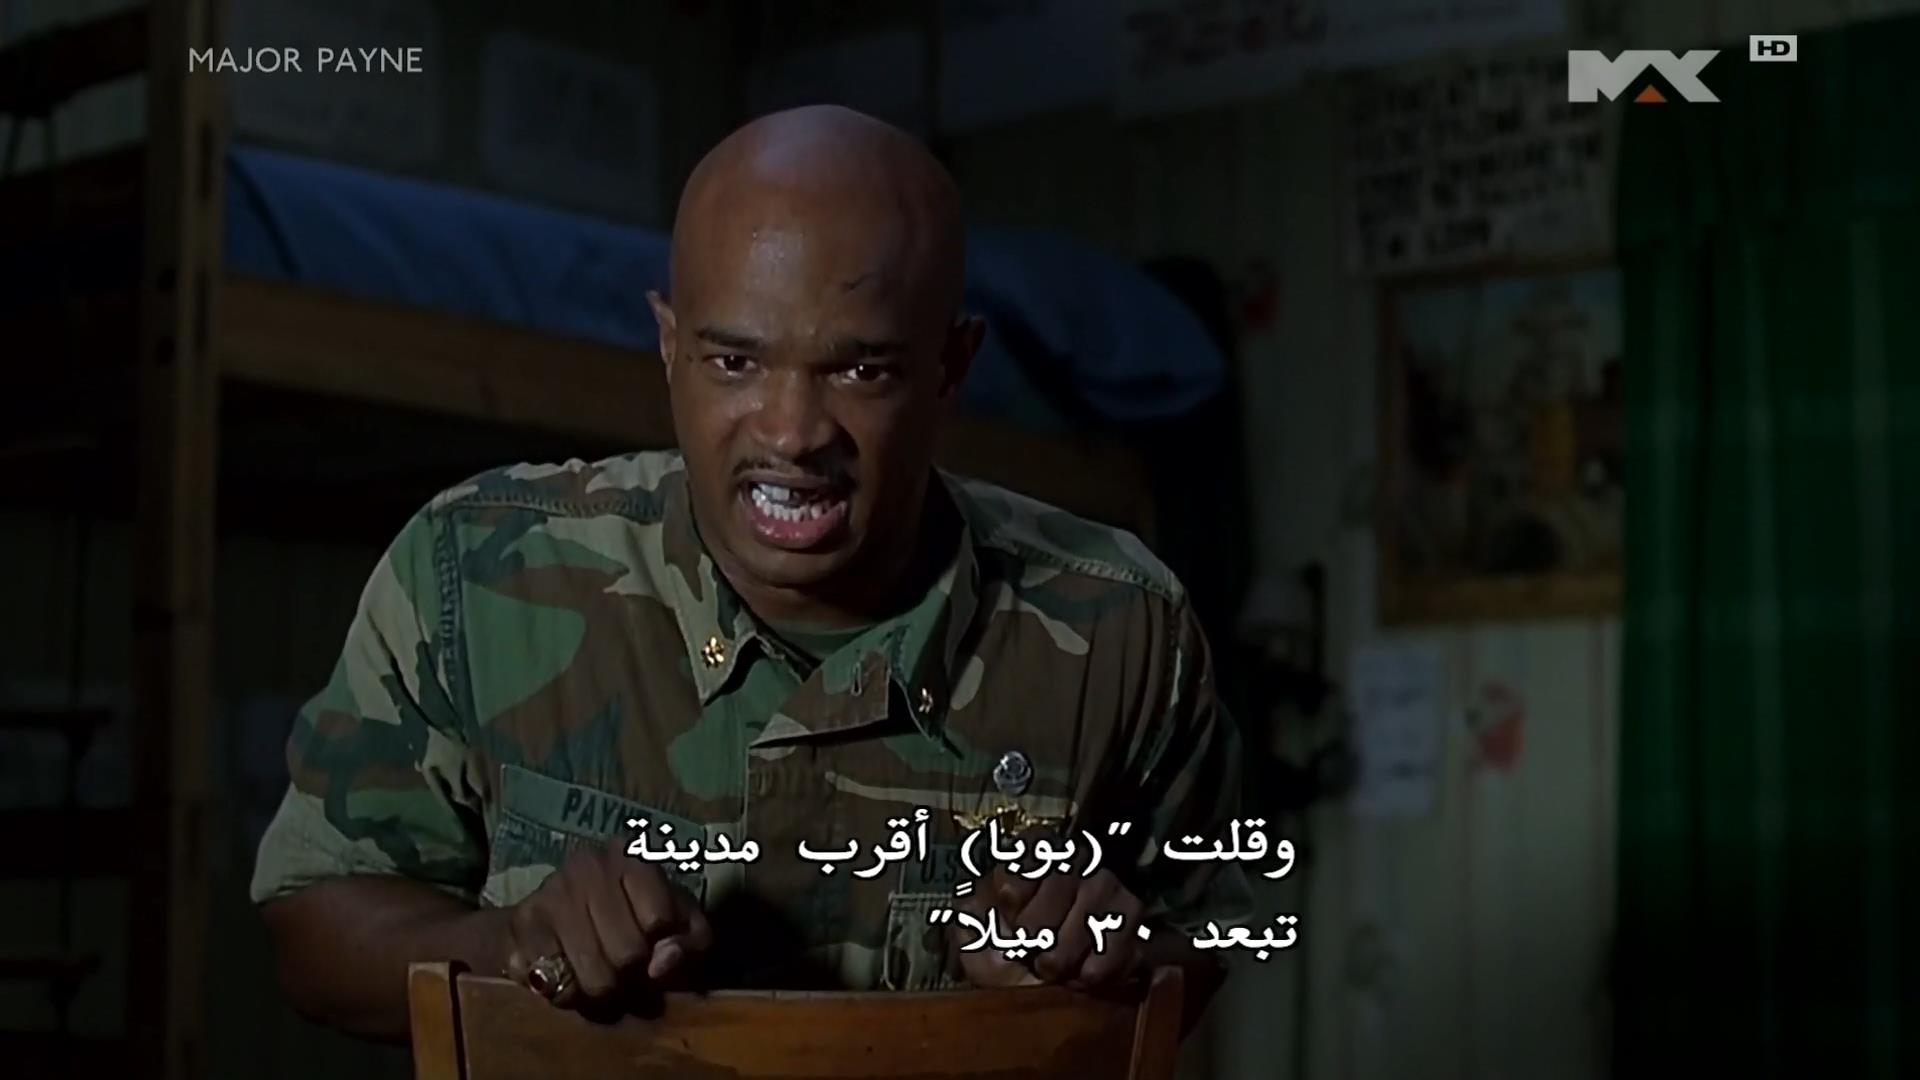 Major payne the little engine that could